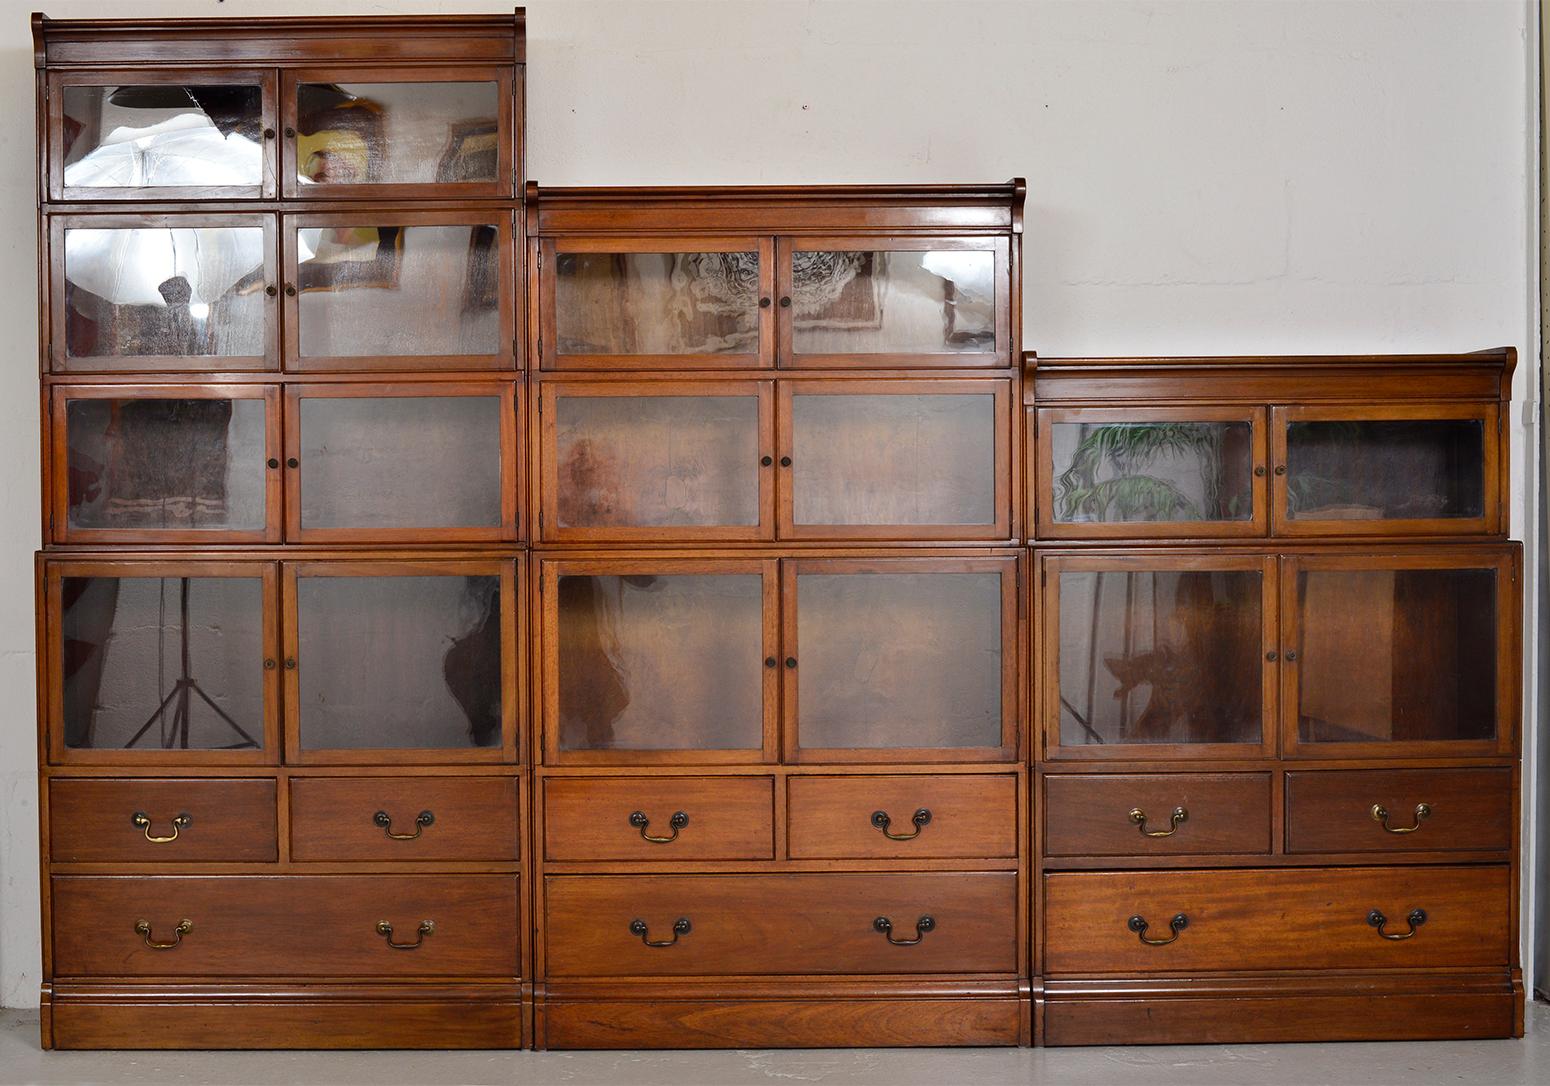 British 1920s Minty Barristers Modular Mahogany Library Bookcases Drawers Cabinets